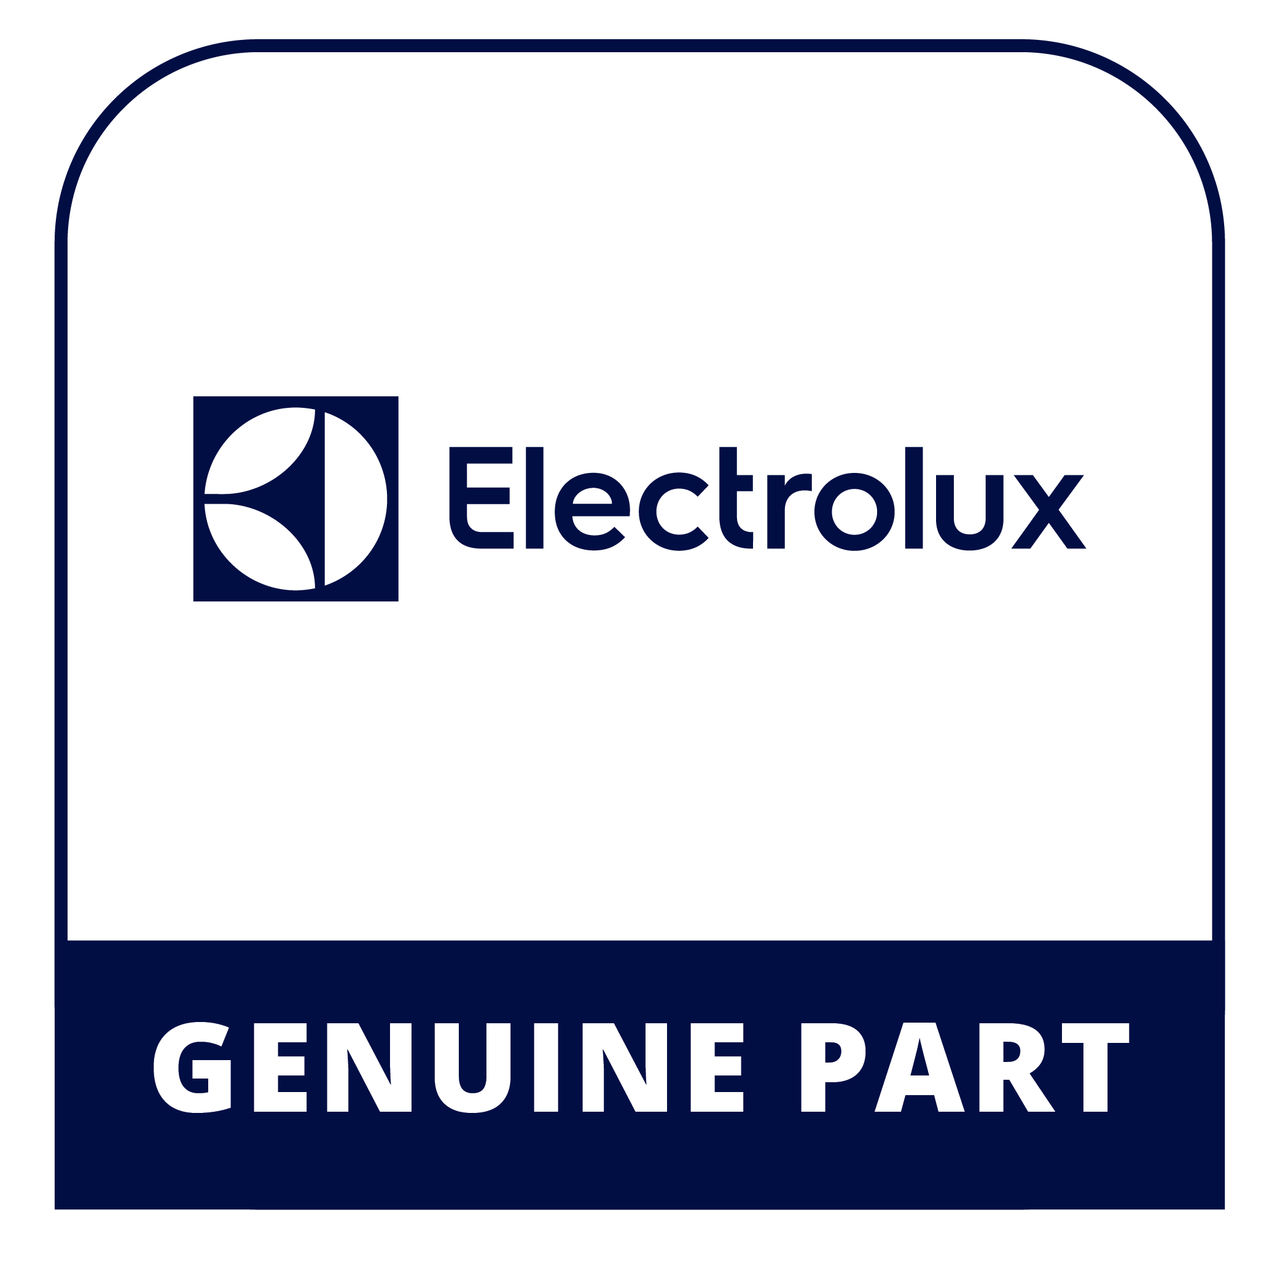 Frigidaire - Electrolux 318205106 Owners Manual - Genuine Electrolux Part